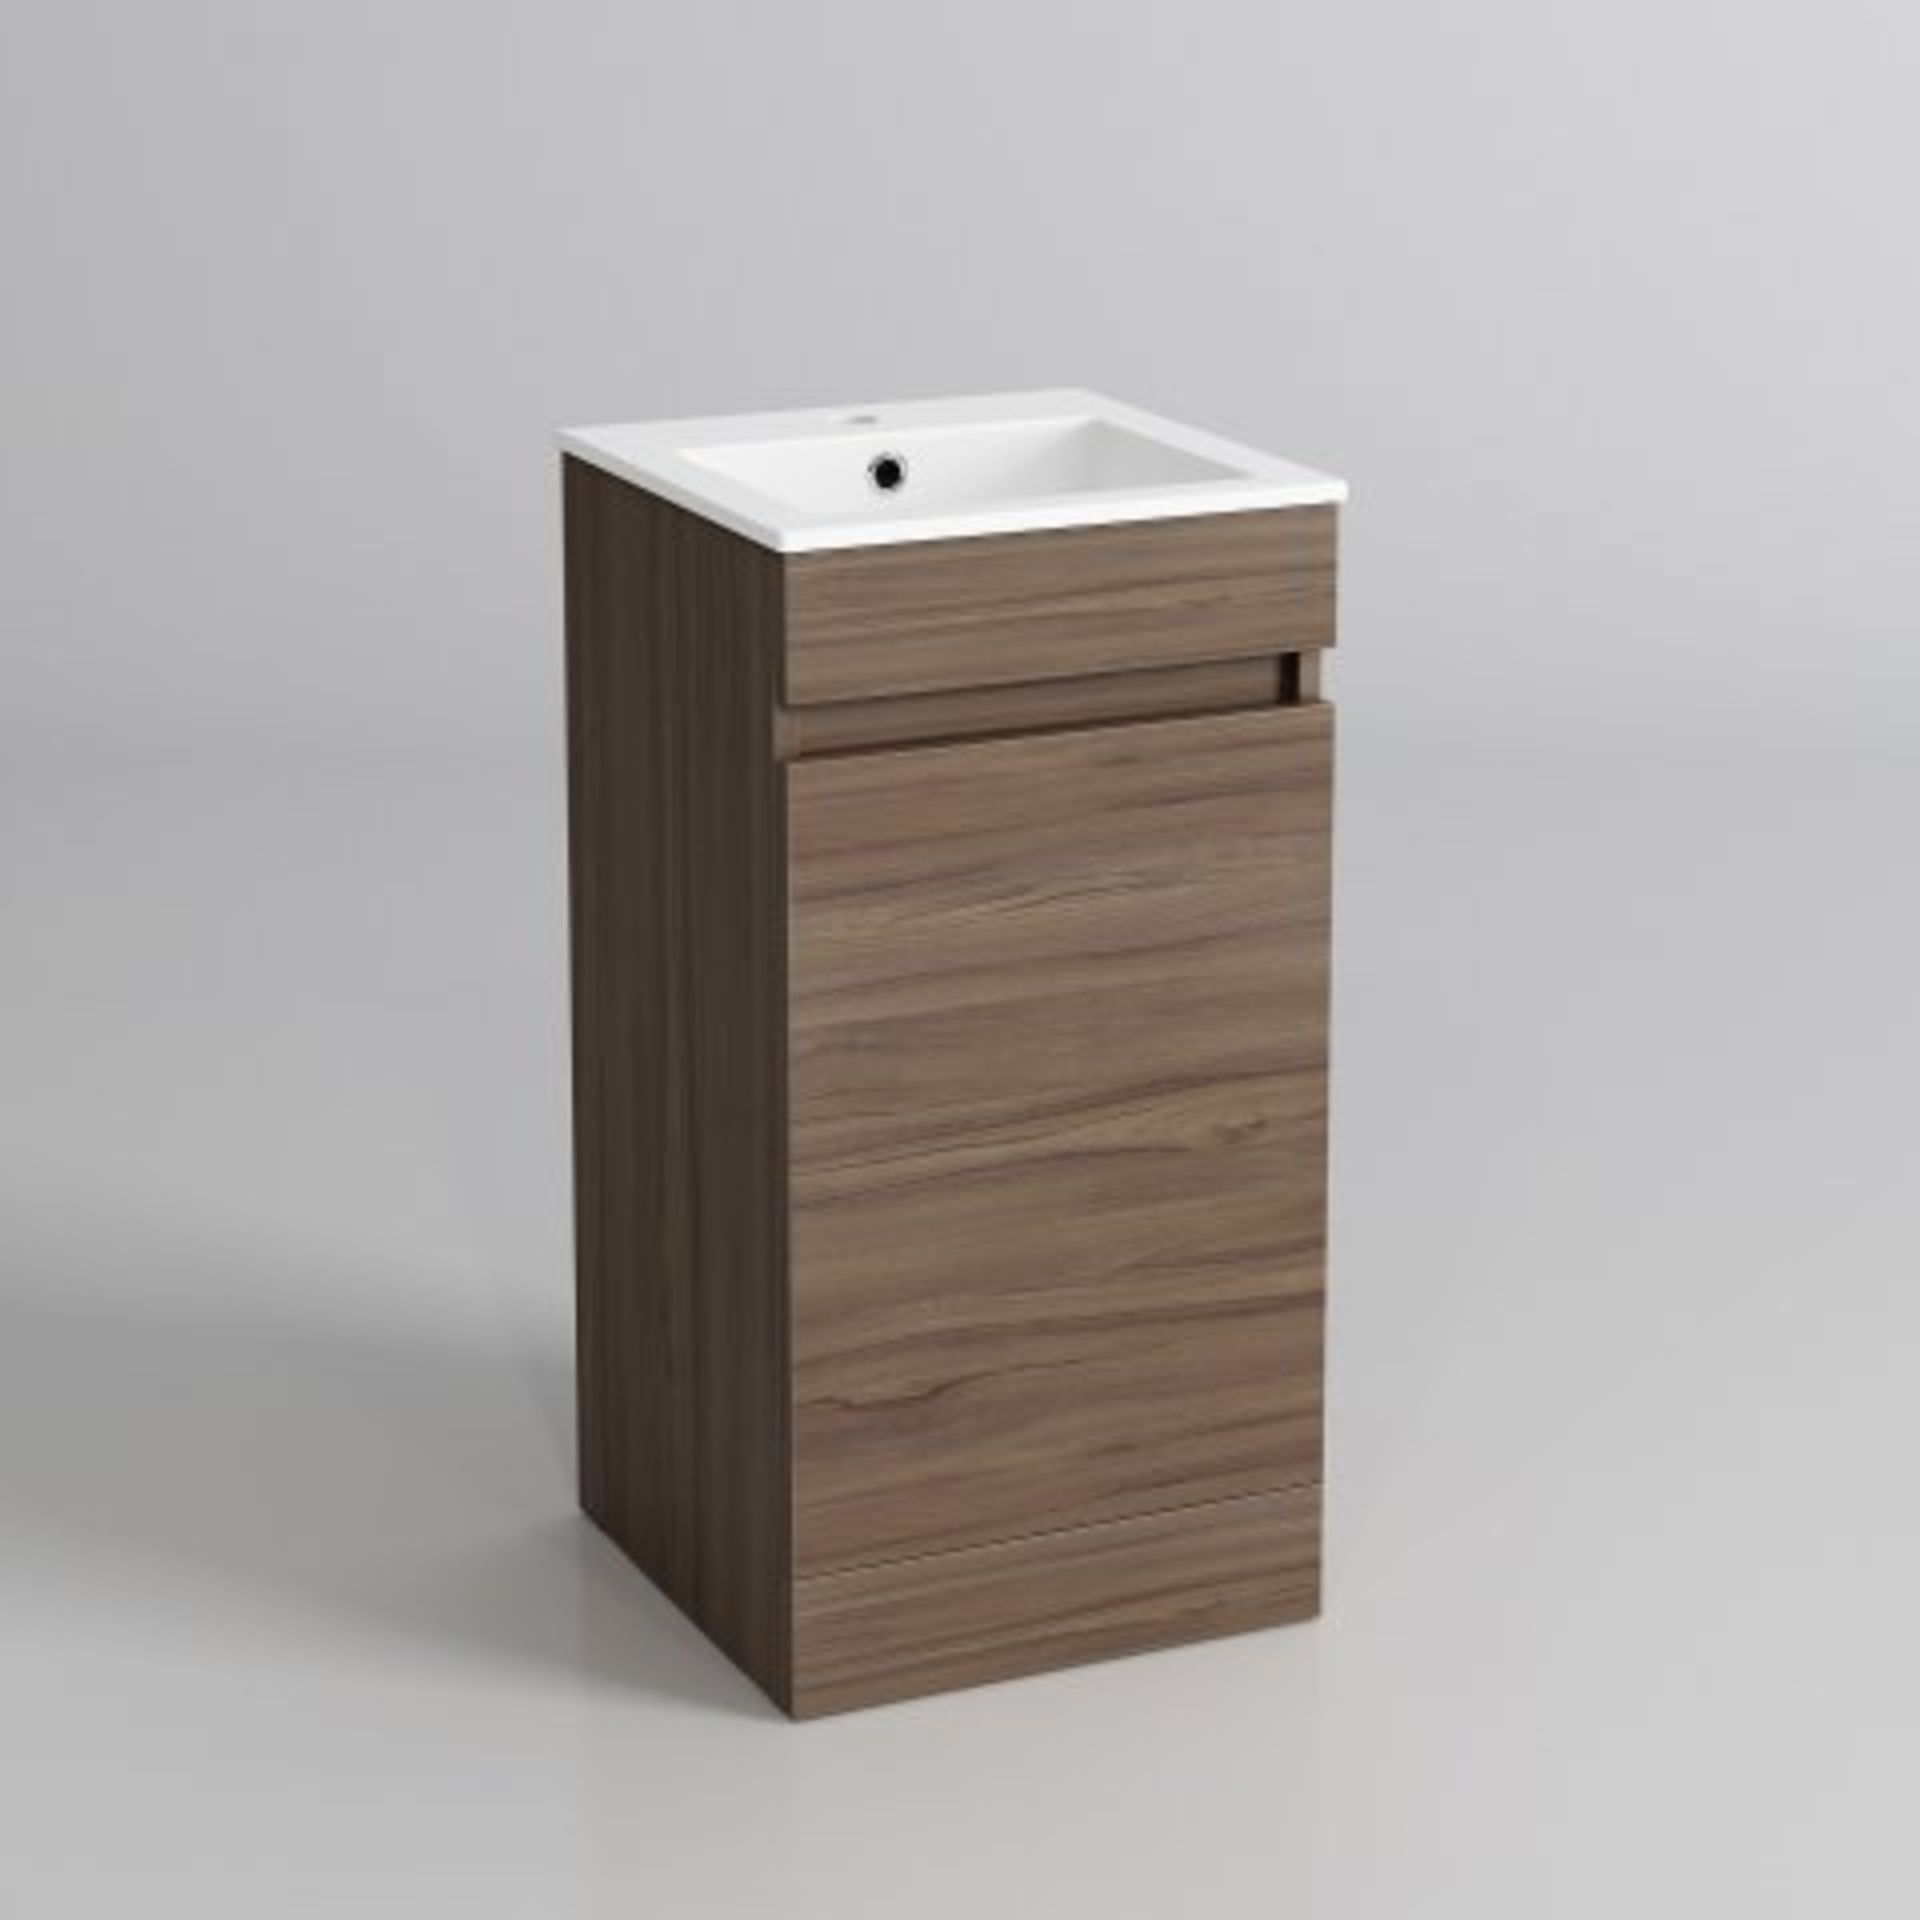 (SKU26) 800mm Trent High Gloss White Double Drawer Basin Cabinet - Floor Standing. RRP £425.99 - Image 3 of 3